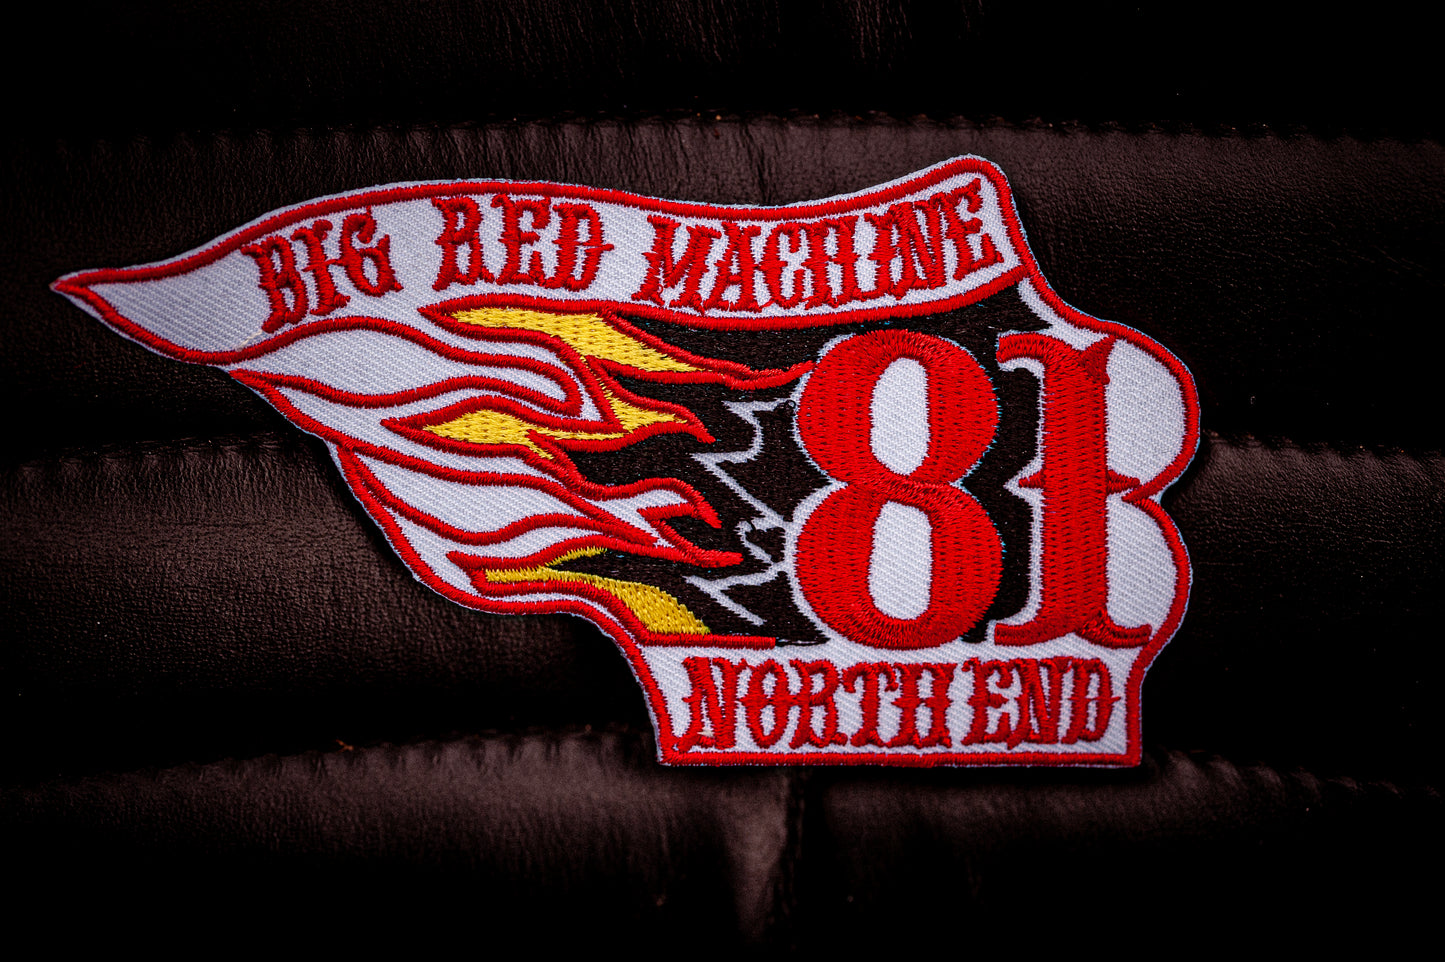 PATCHES AUFNÄHER "SUPPORT 81"